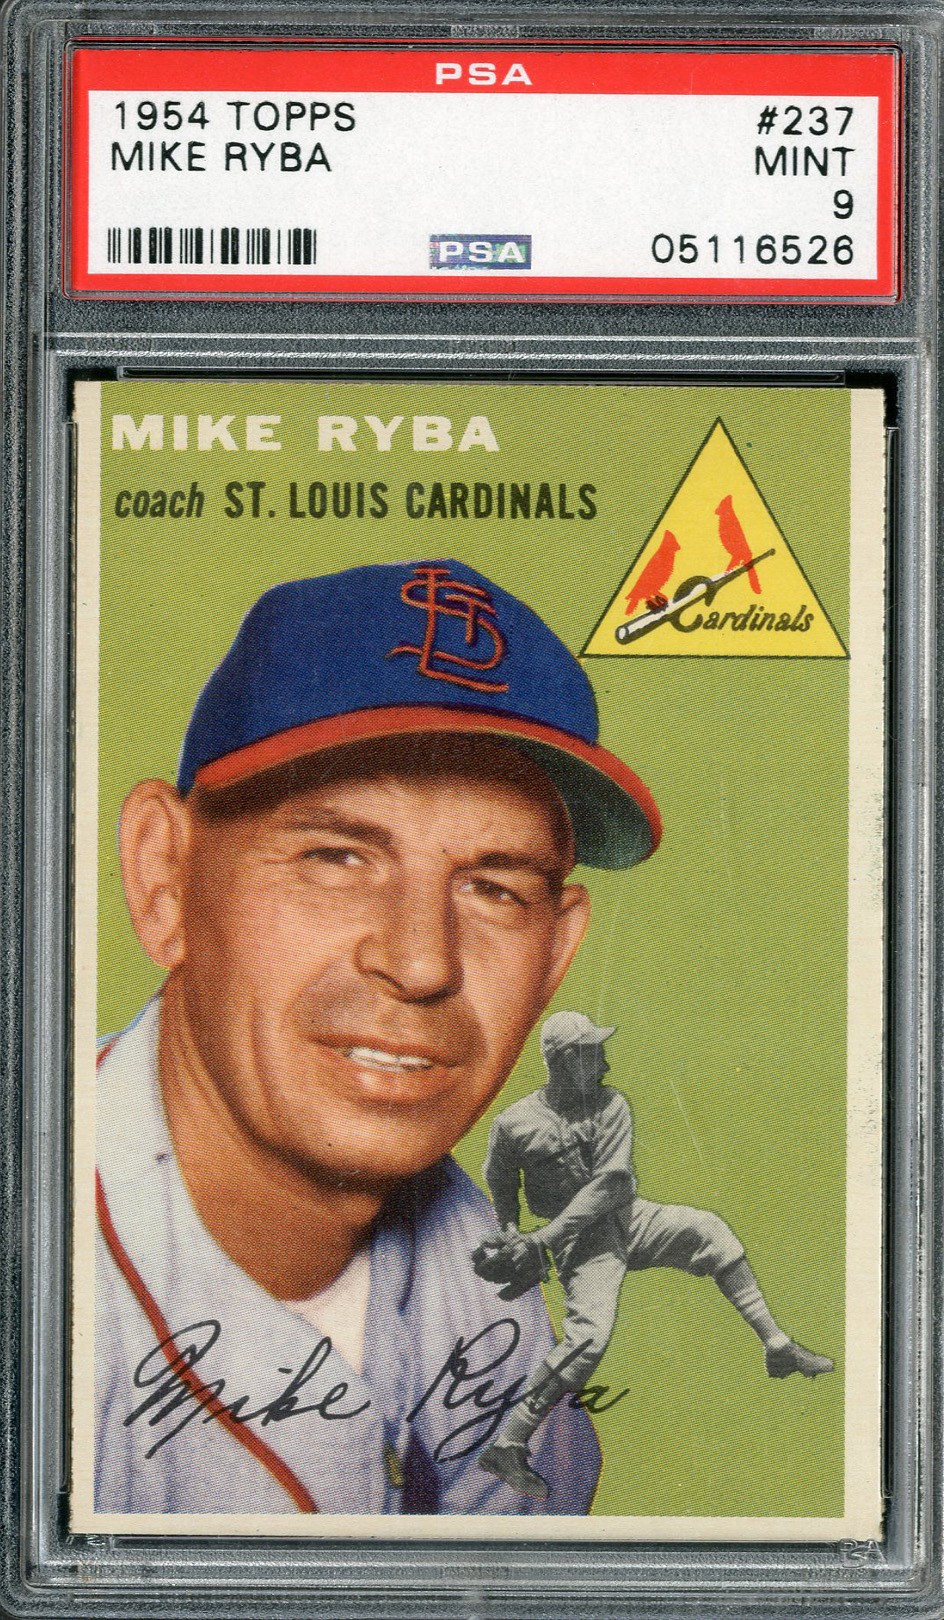 Baseball and Trading Cards - 1954 Topps #237 Mike Ryba PSA MINT 9